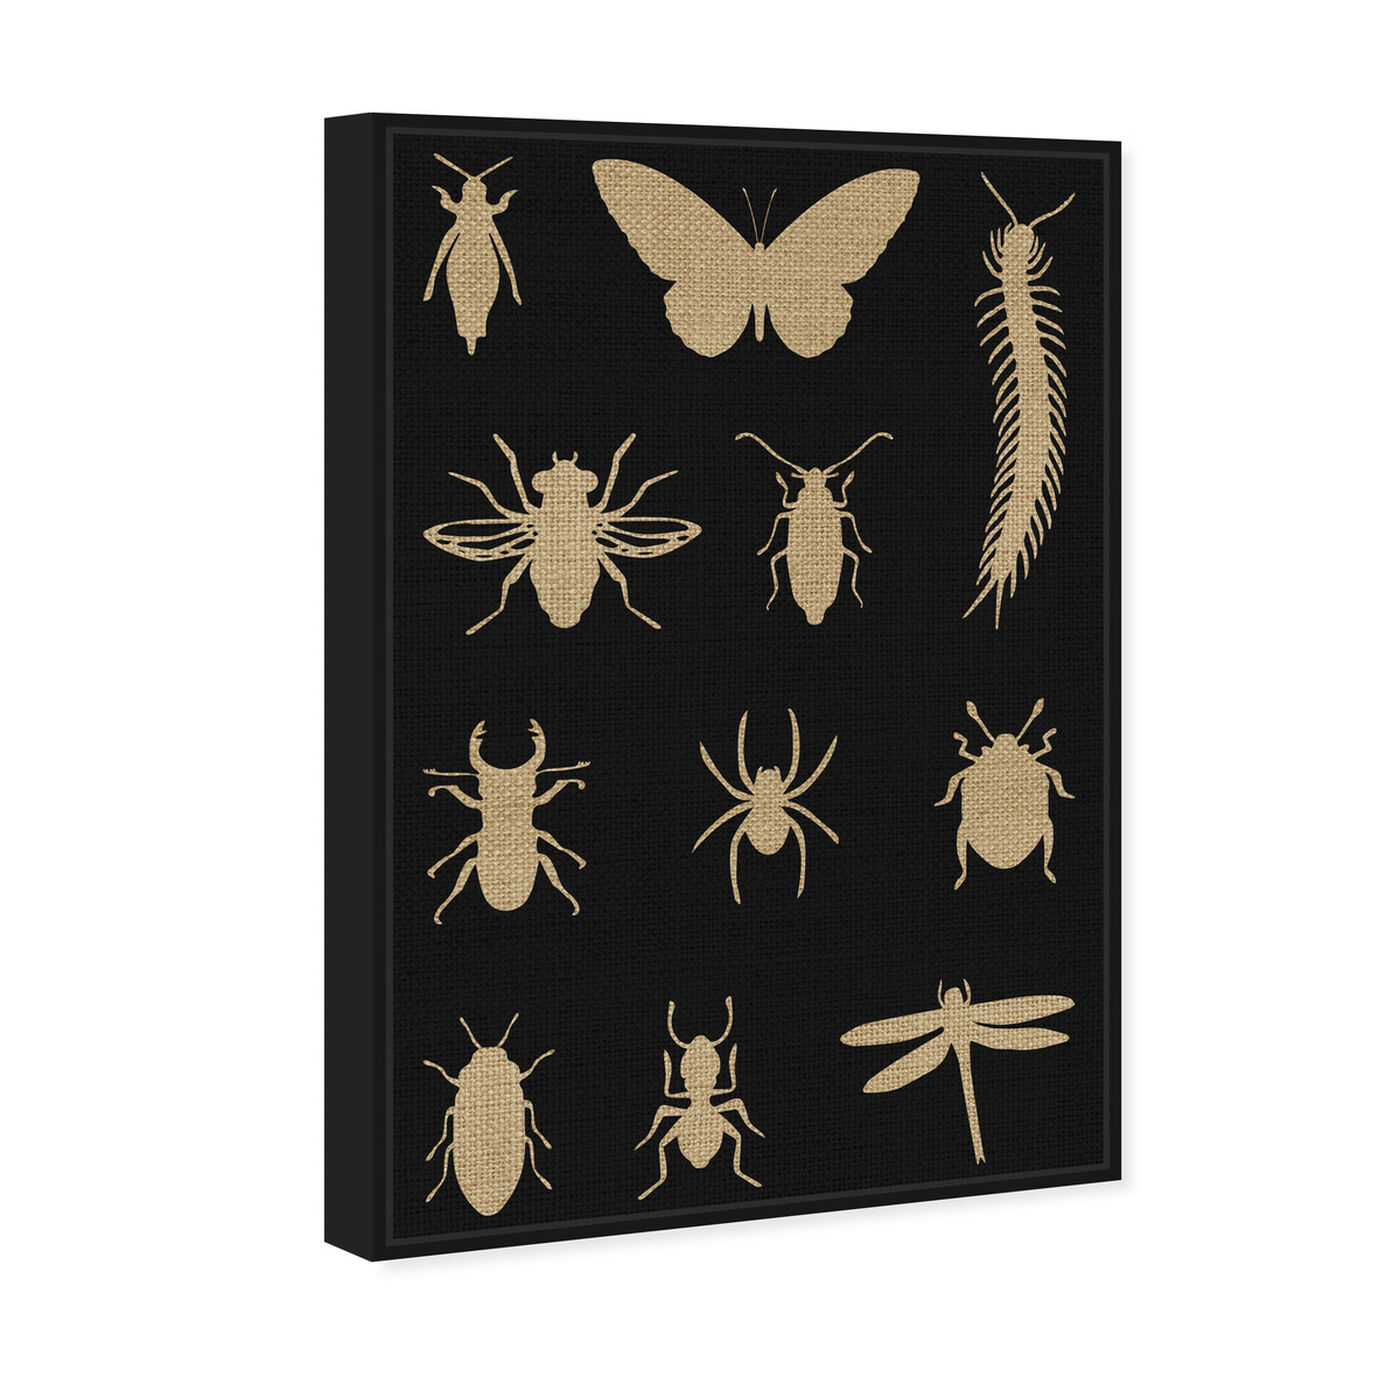 Angled view of Black Creepy Crawlies featuring animals and insects art.